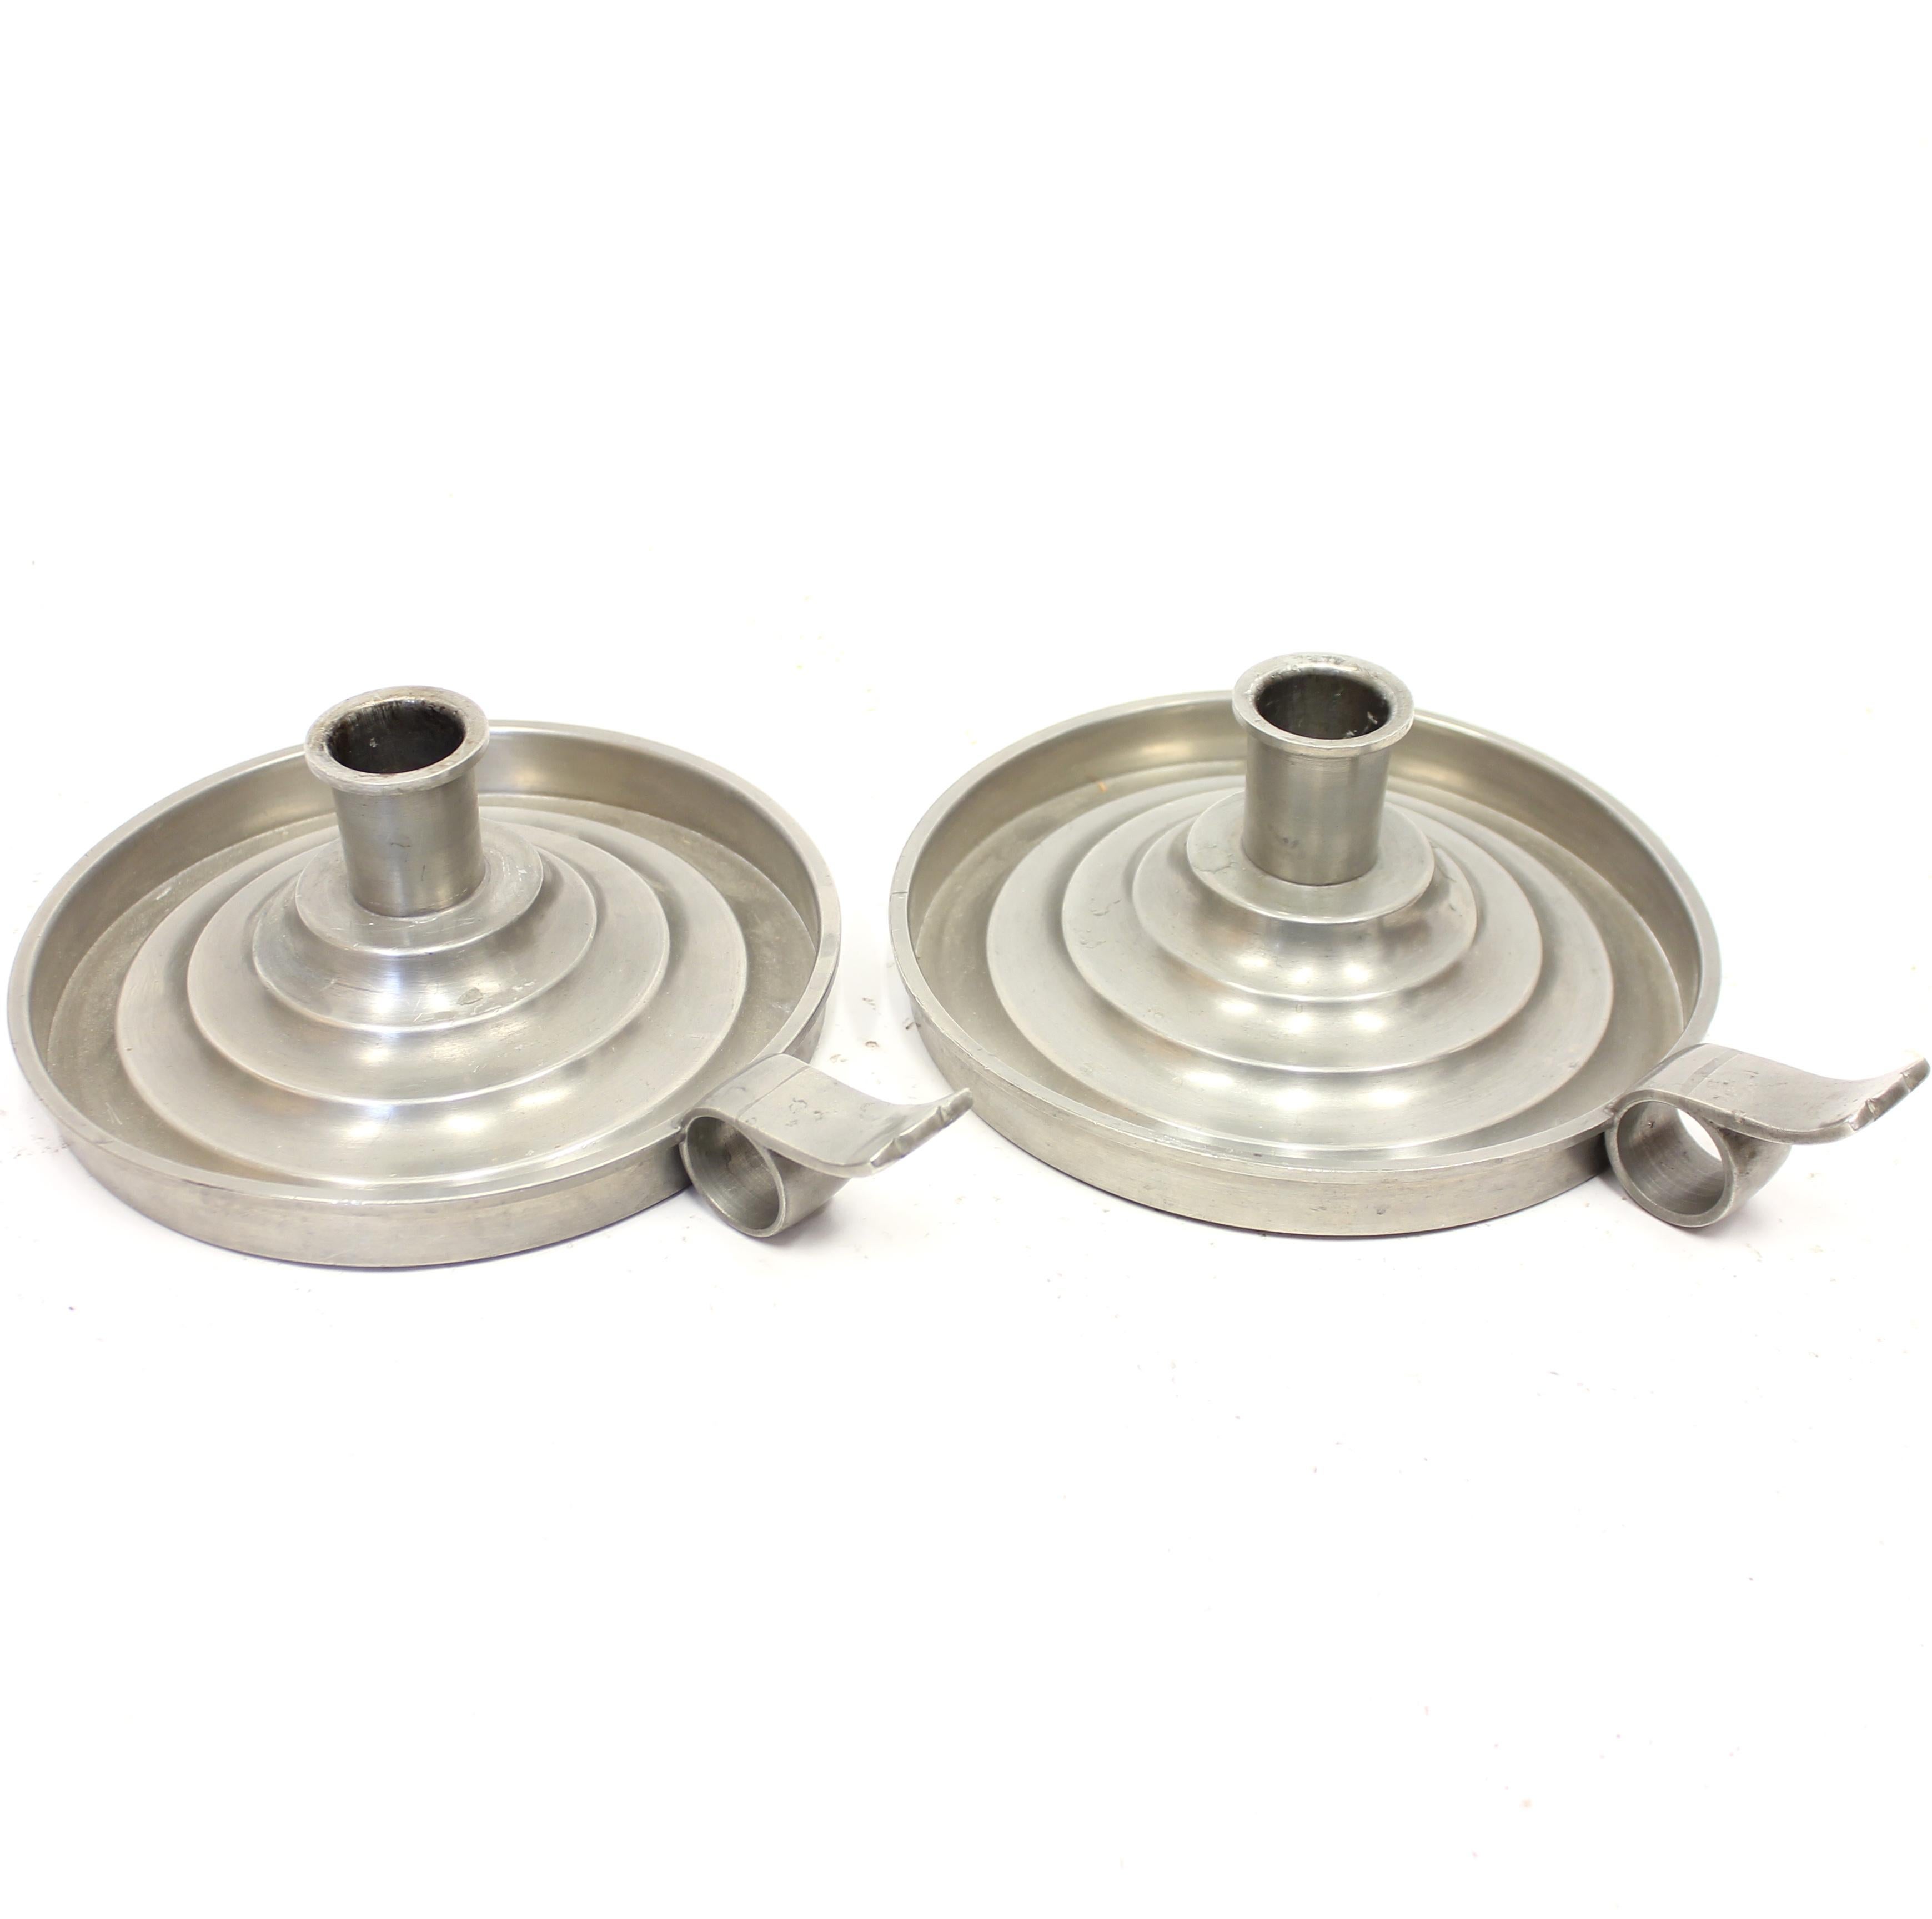 Pair of Art Deco candle holders manufactured by Swedish firm C.G Hallberg from the 1930s. Round form with a stepped inner section that holds up the candles in the middle. Handle on the side for easy carrying. This kind of small candle holders with a